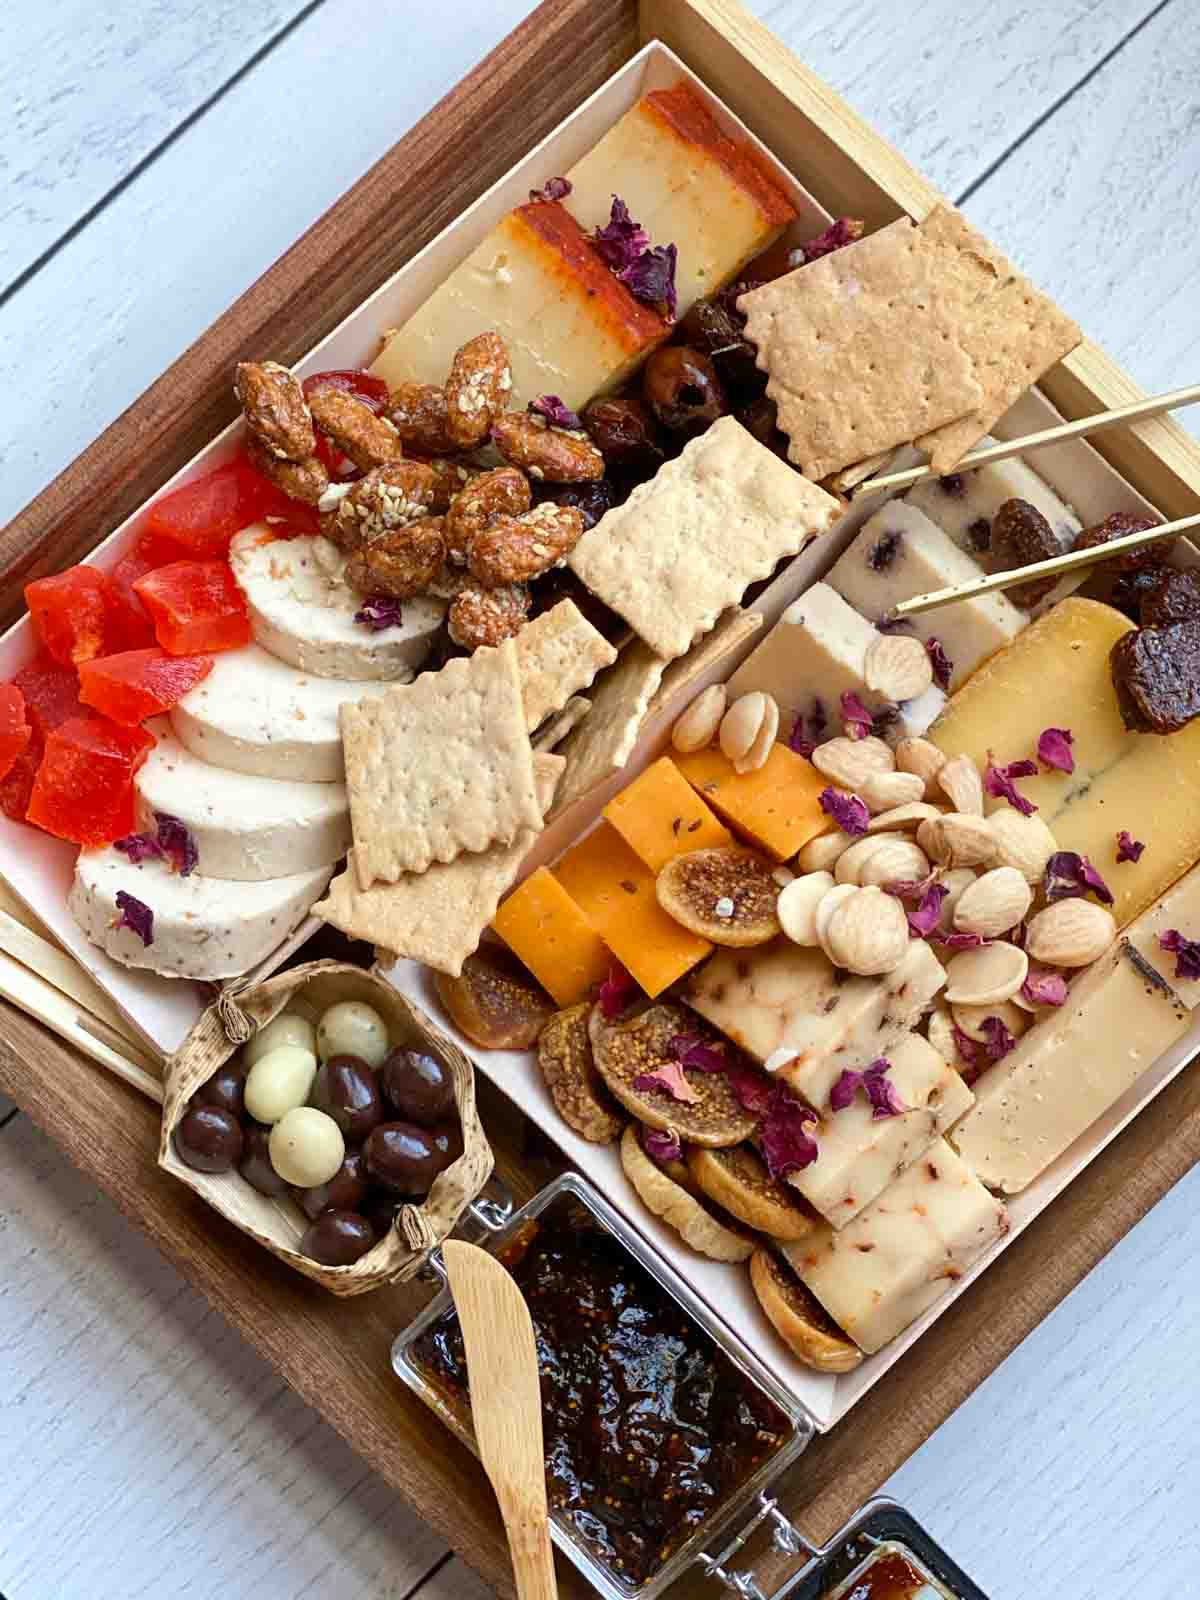 Cicette cheese board from Boarderie, unwrapped and arranged